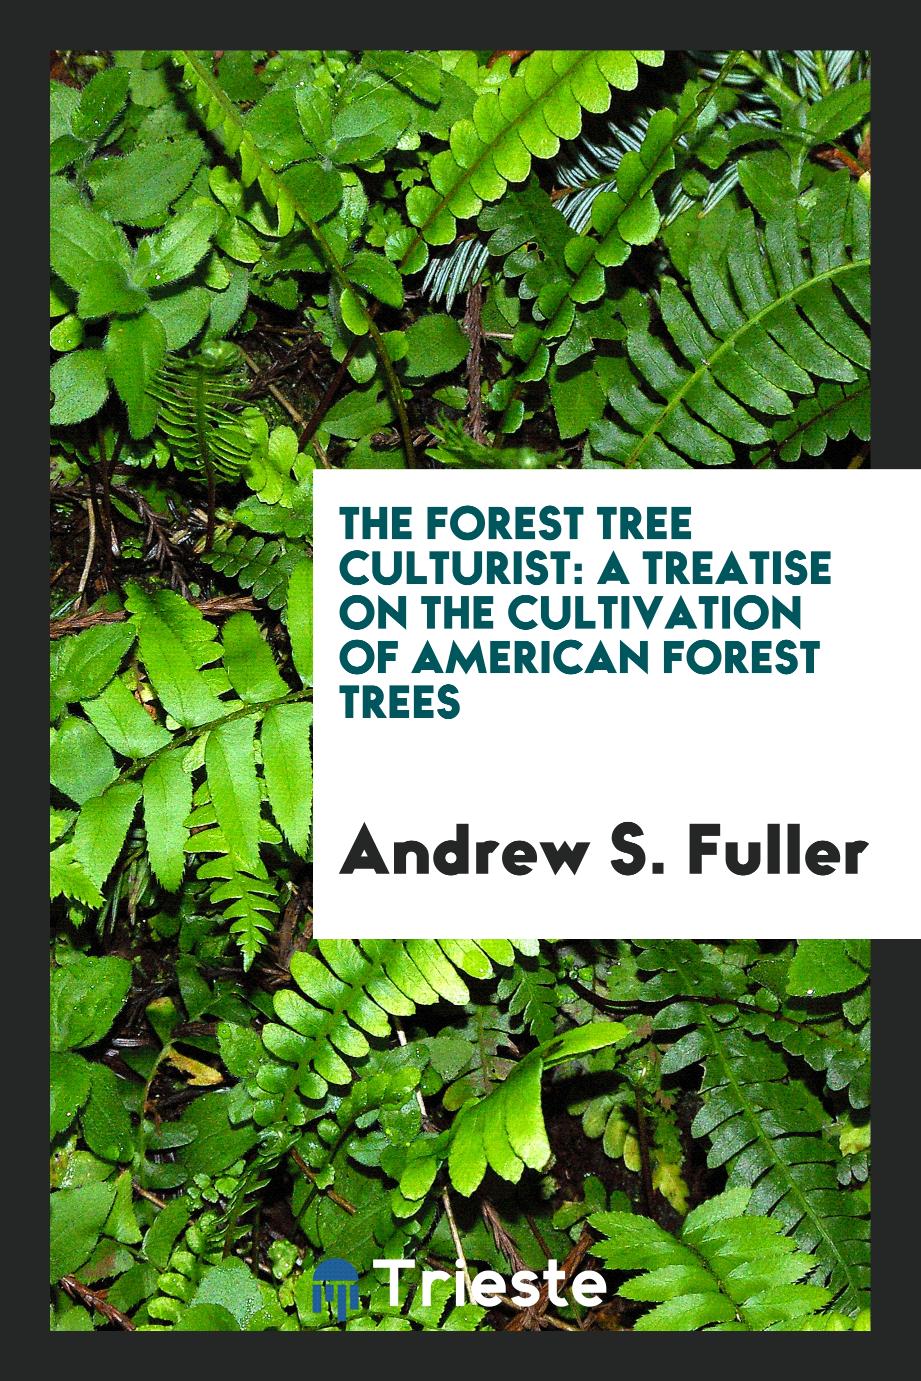 The Forest Tree Culturist: A Treatise on the Cultivation of American Forest Trees